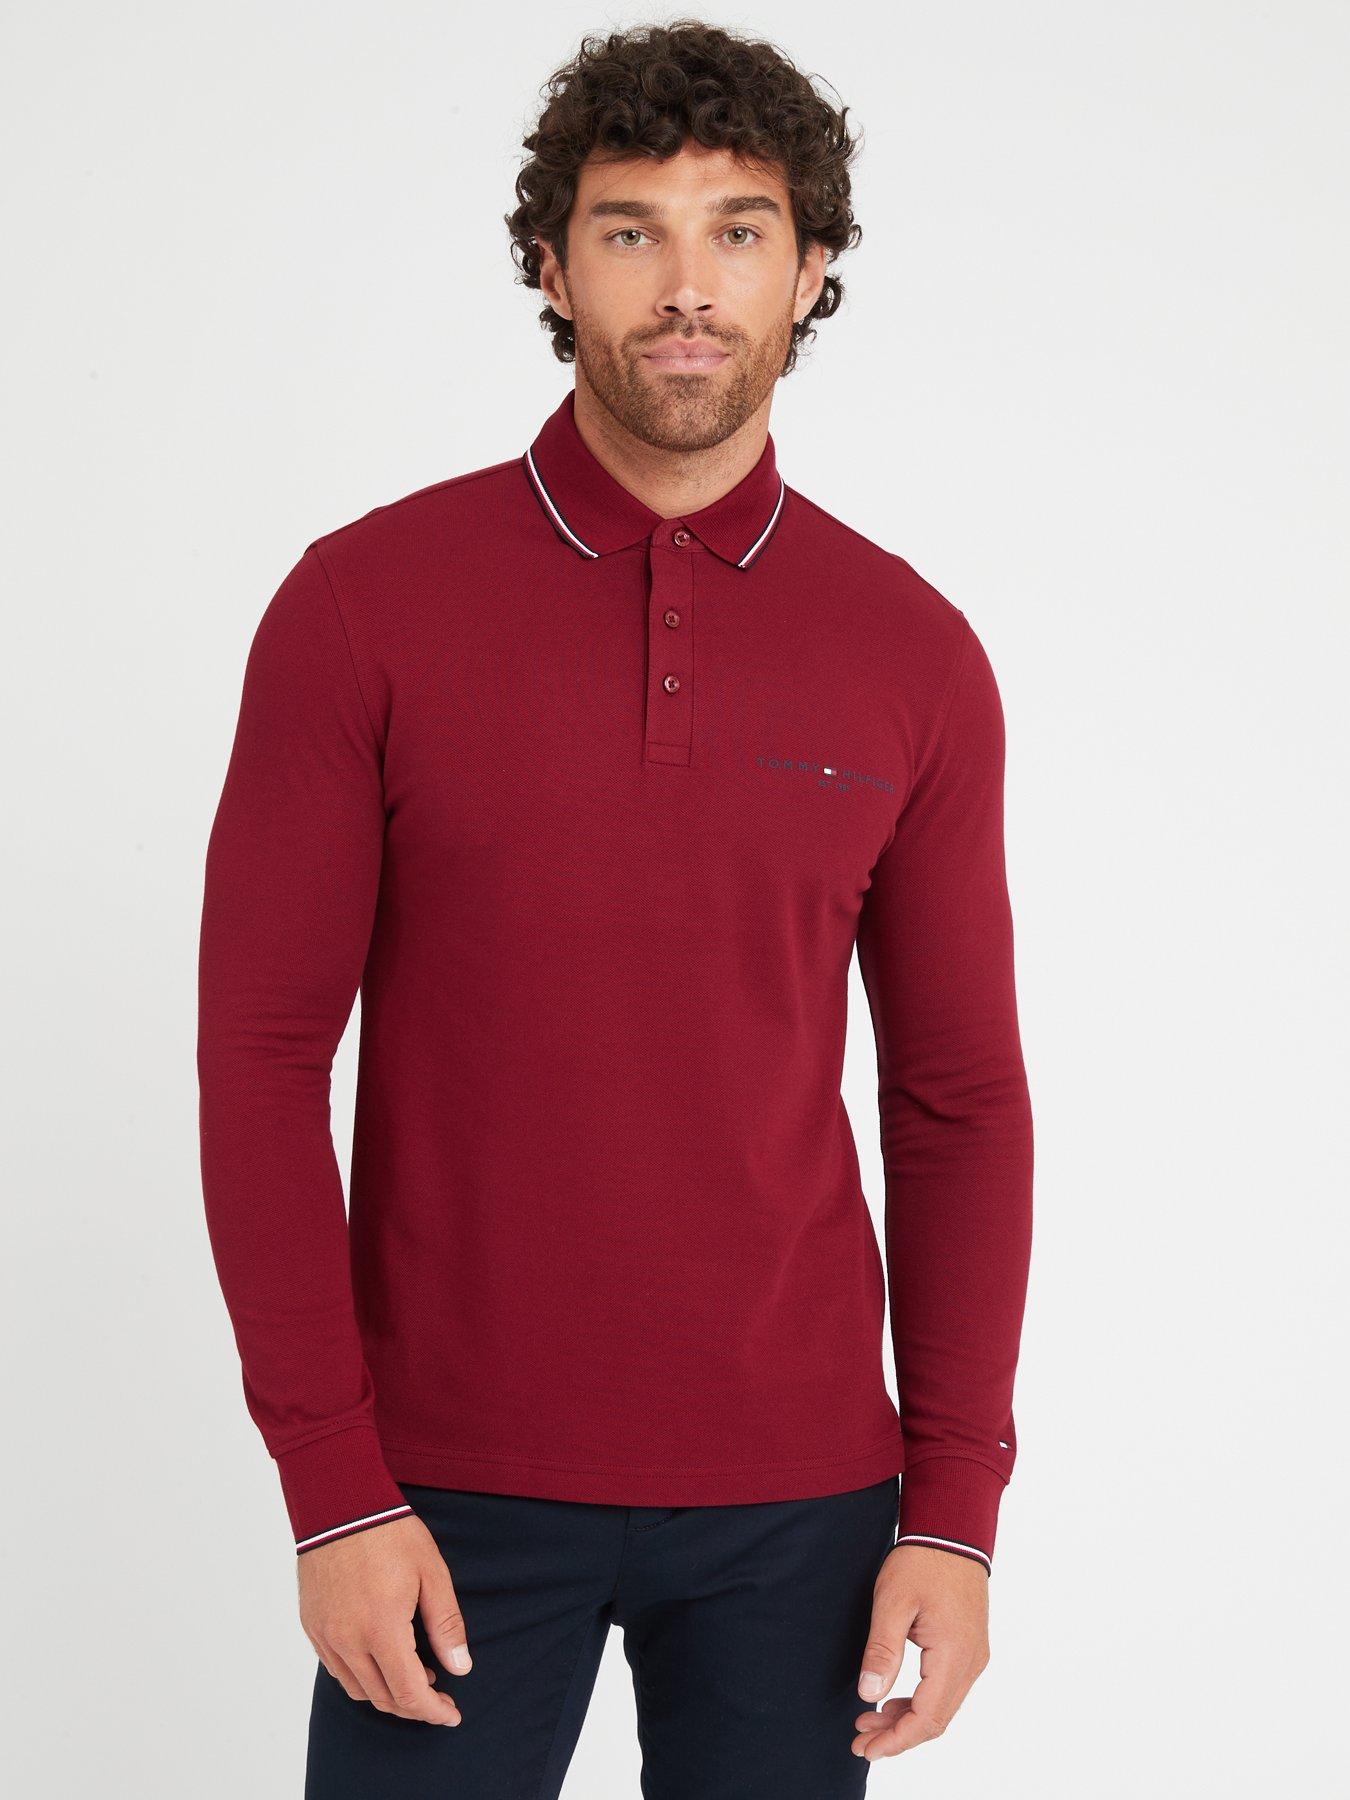 & Men polos hilfiger This T-shirts | Tommy | | Month